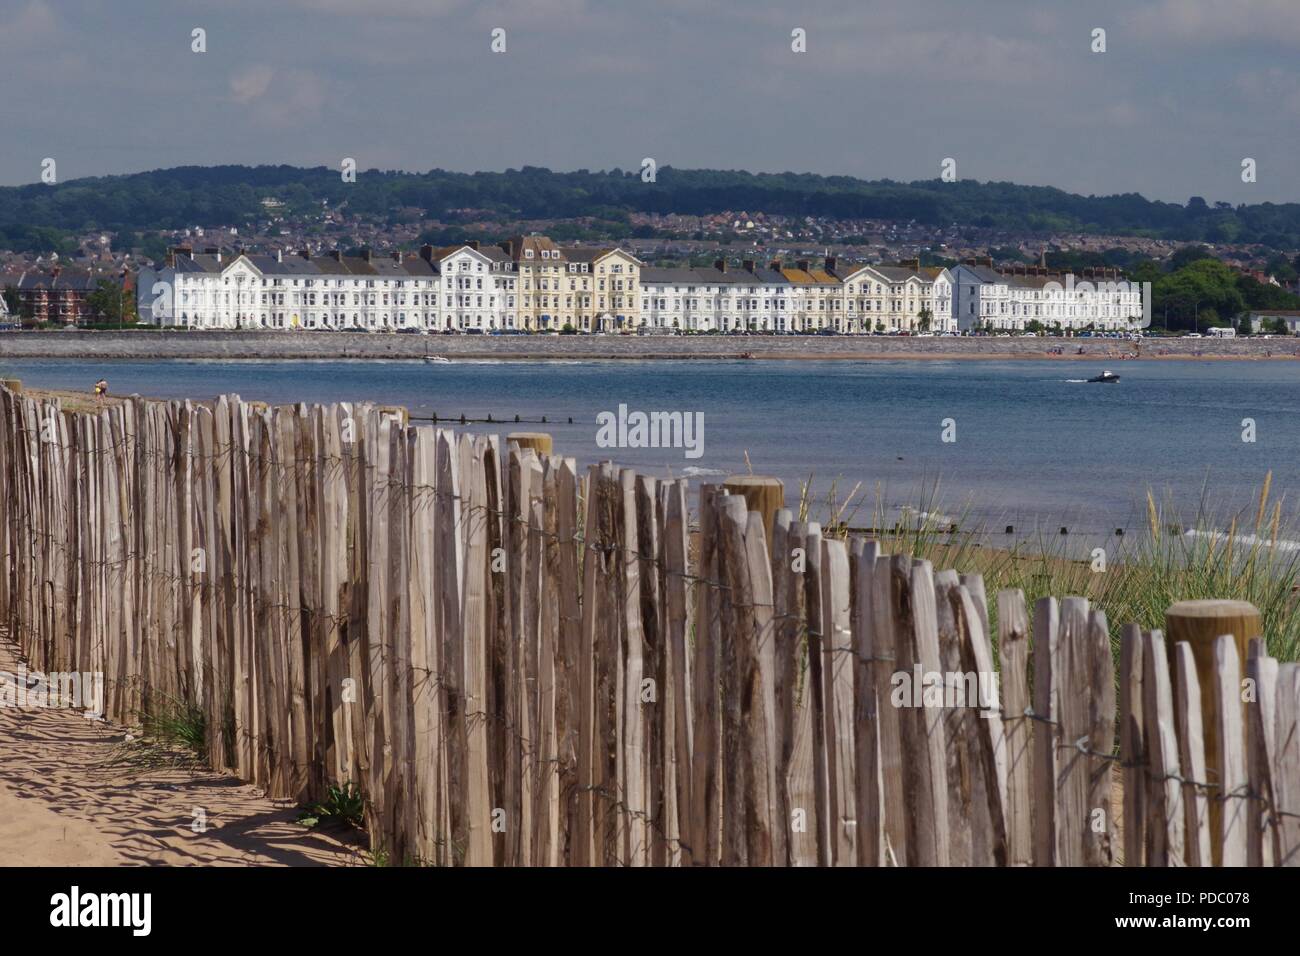 Period Property along Exmouth Seafront Strand, Seen from Dawlish Warren on a Summers Day. Sand Dune Stabilisation Fence in Foreground. Devon, UK. Stock Photo